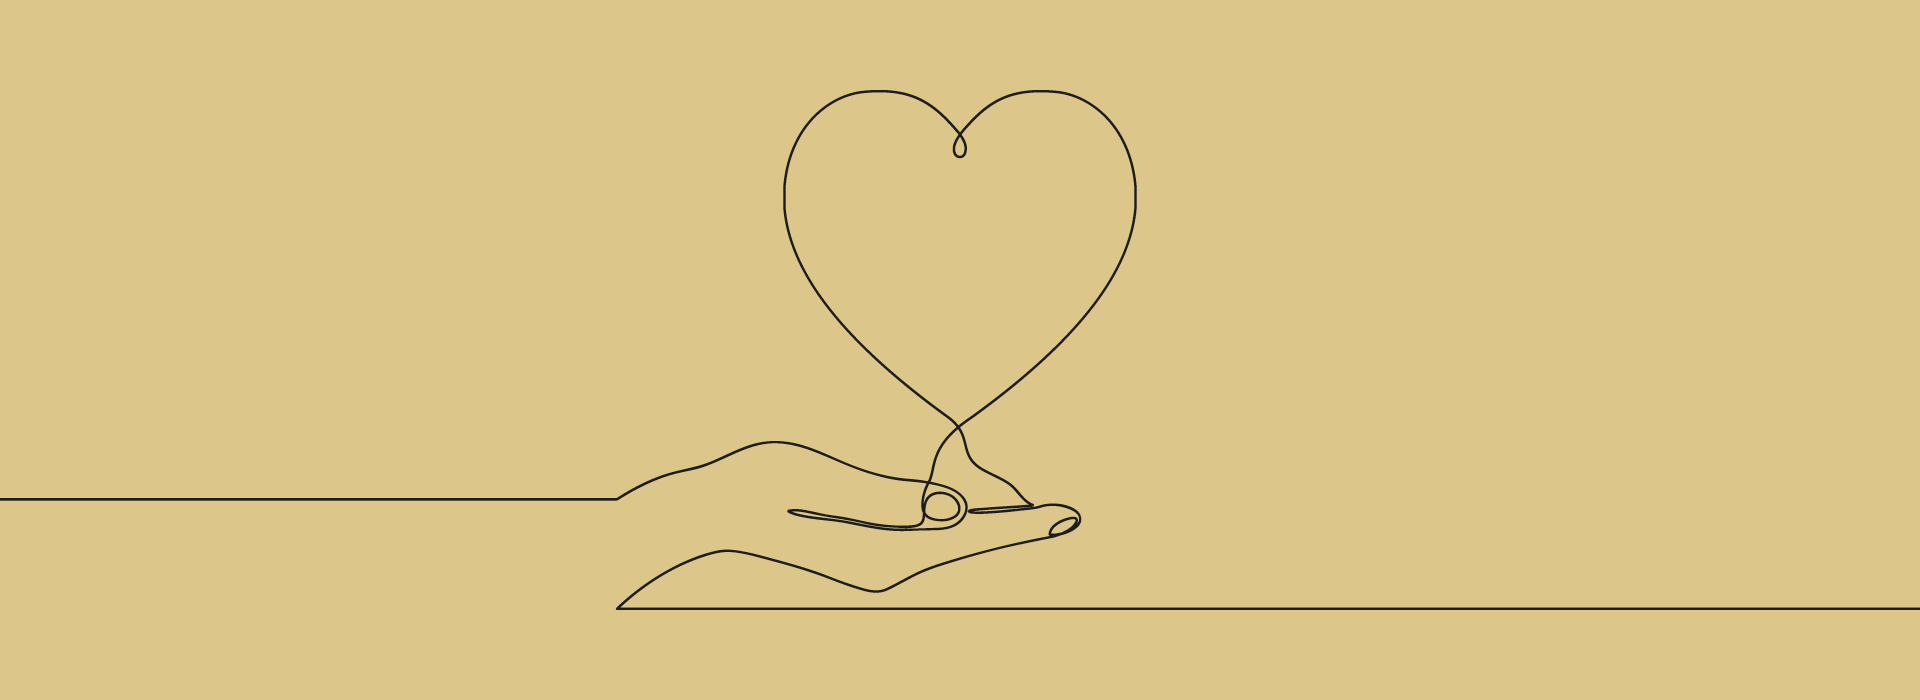 Line drawing of heart in hand